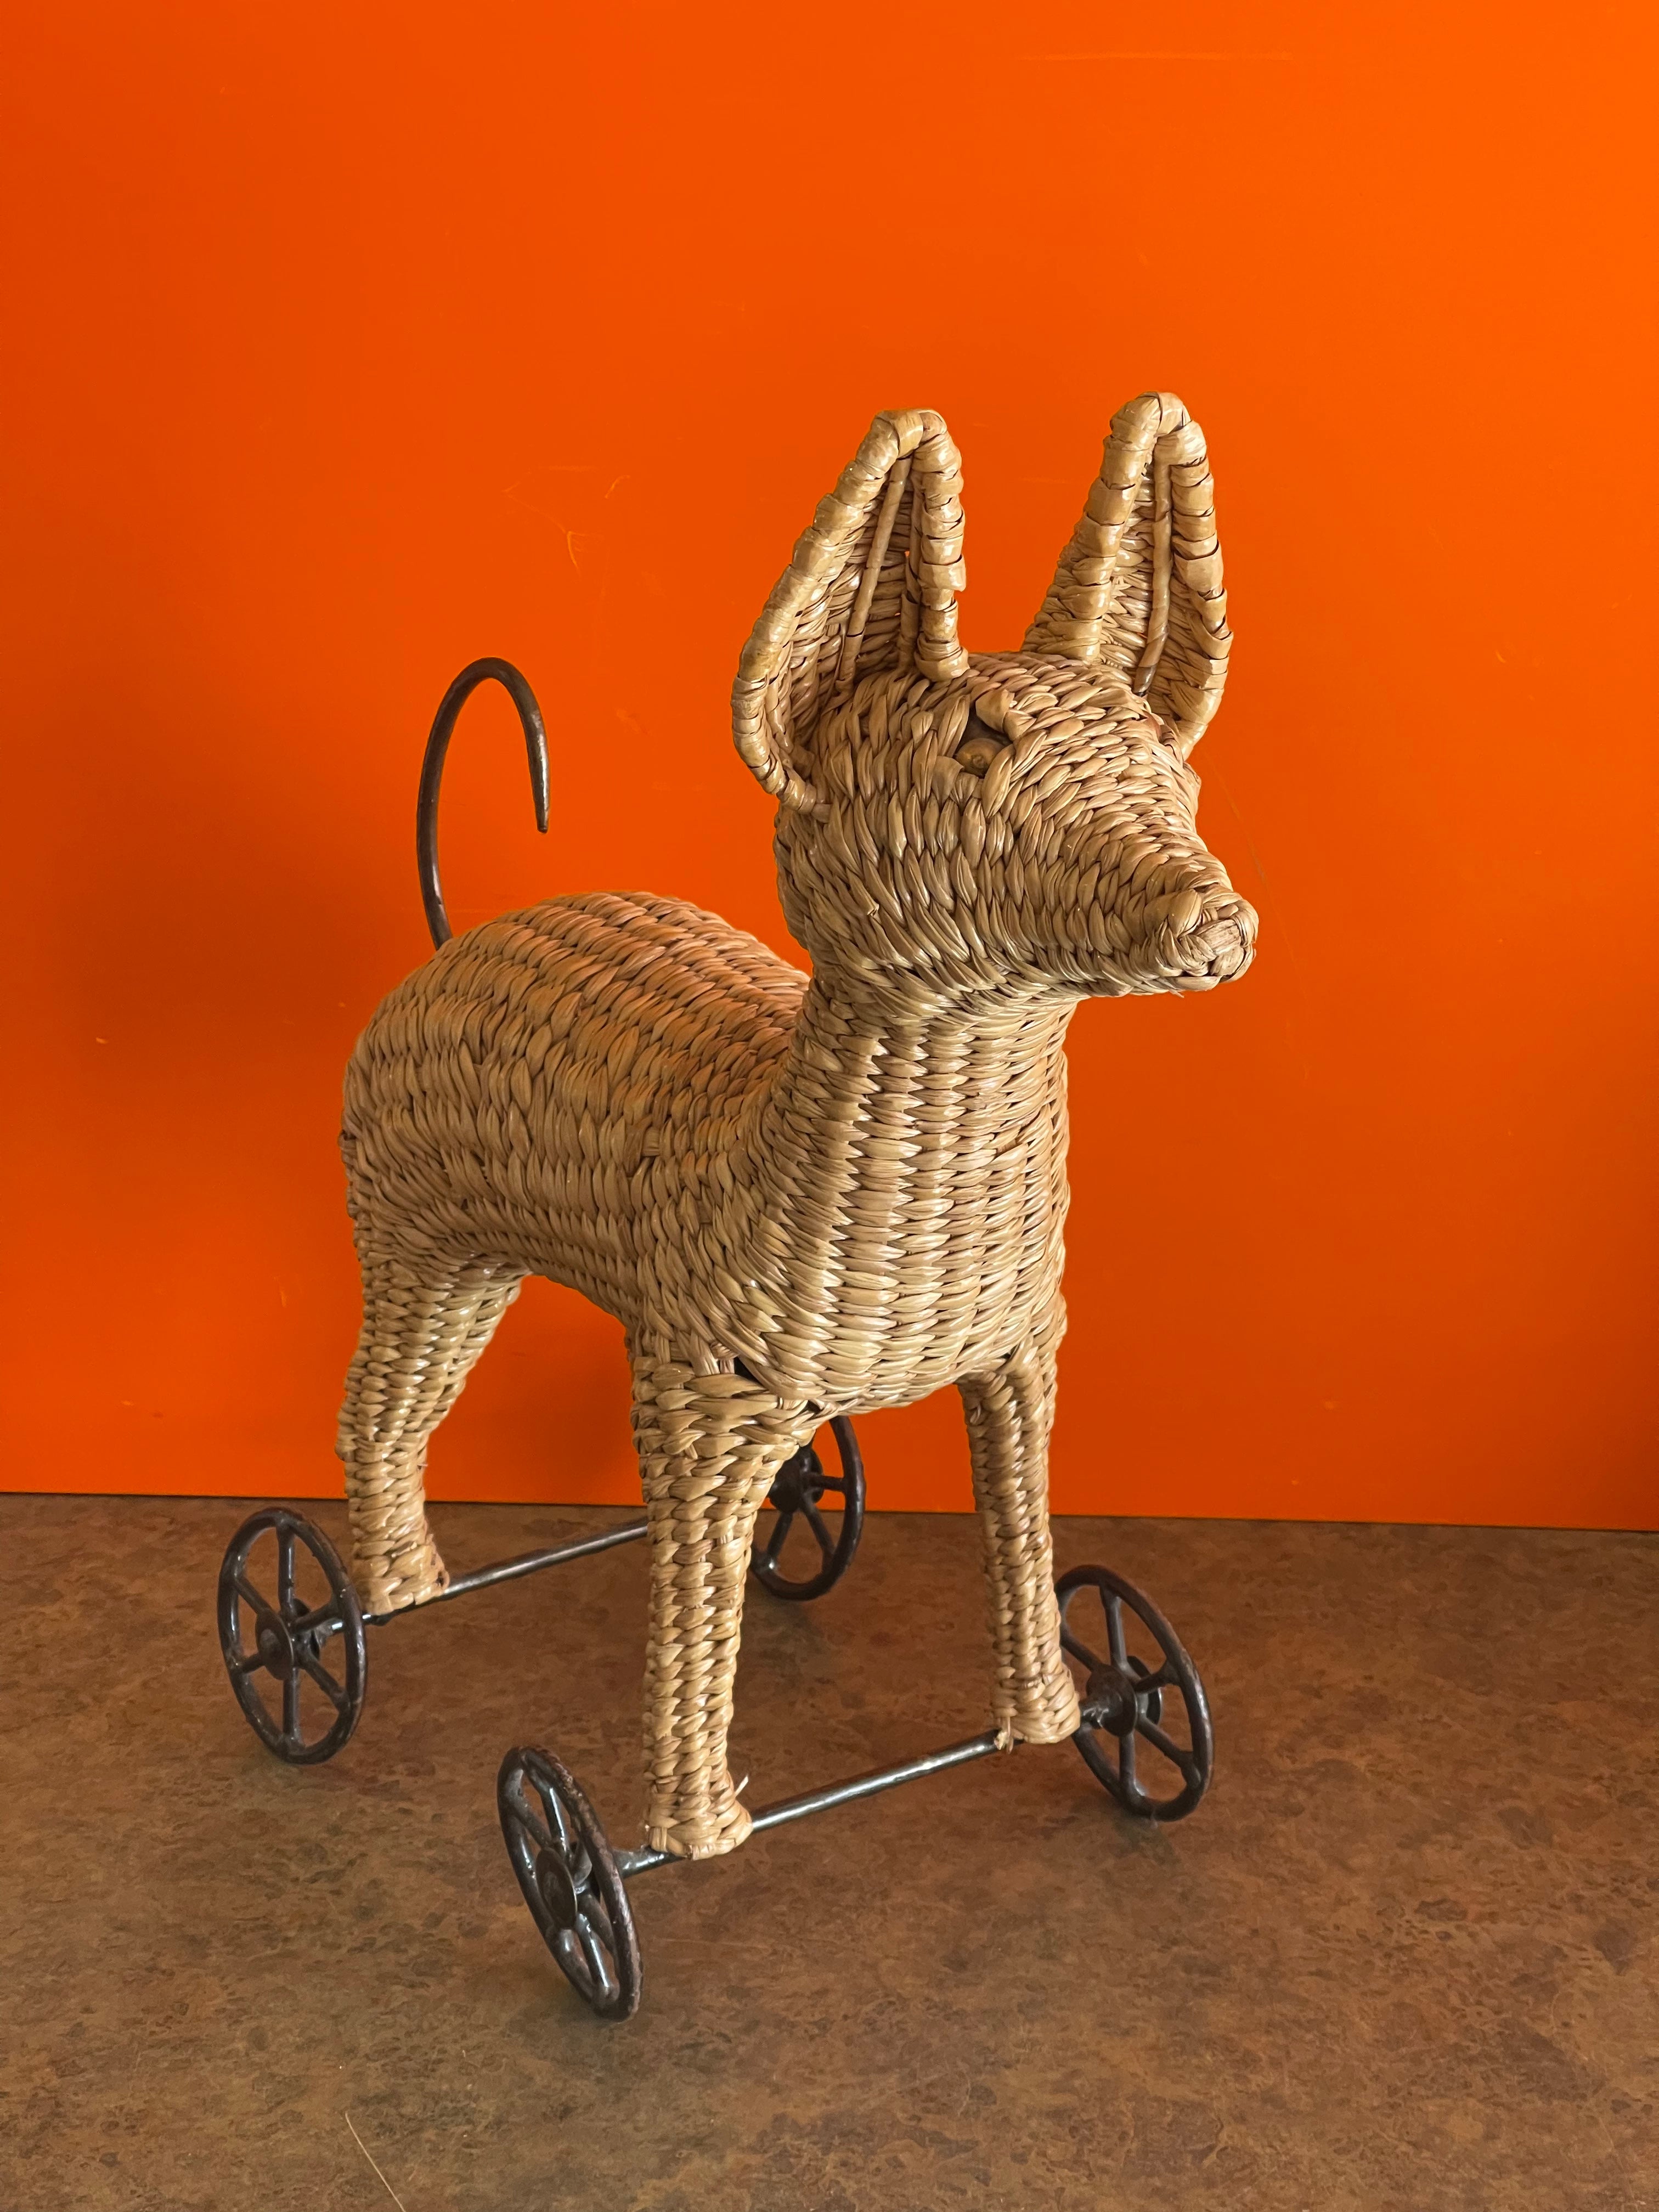 A very rare and fun vintage Chihuahua pull toy / sculpture by Mario Lopez Torres, circa 1974. The piece is in great vintage condition and measures 8